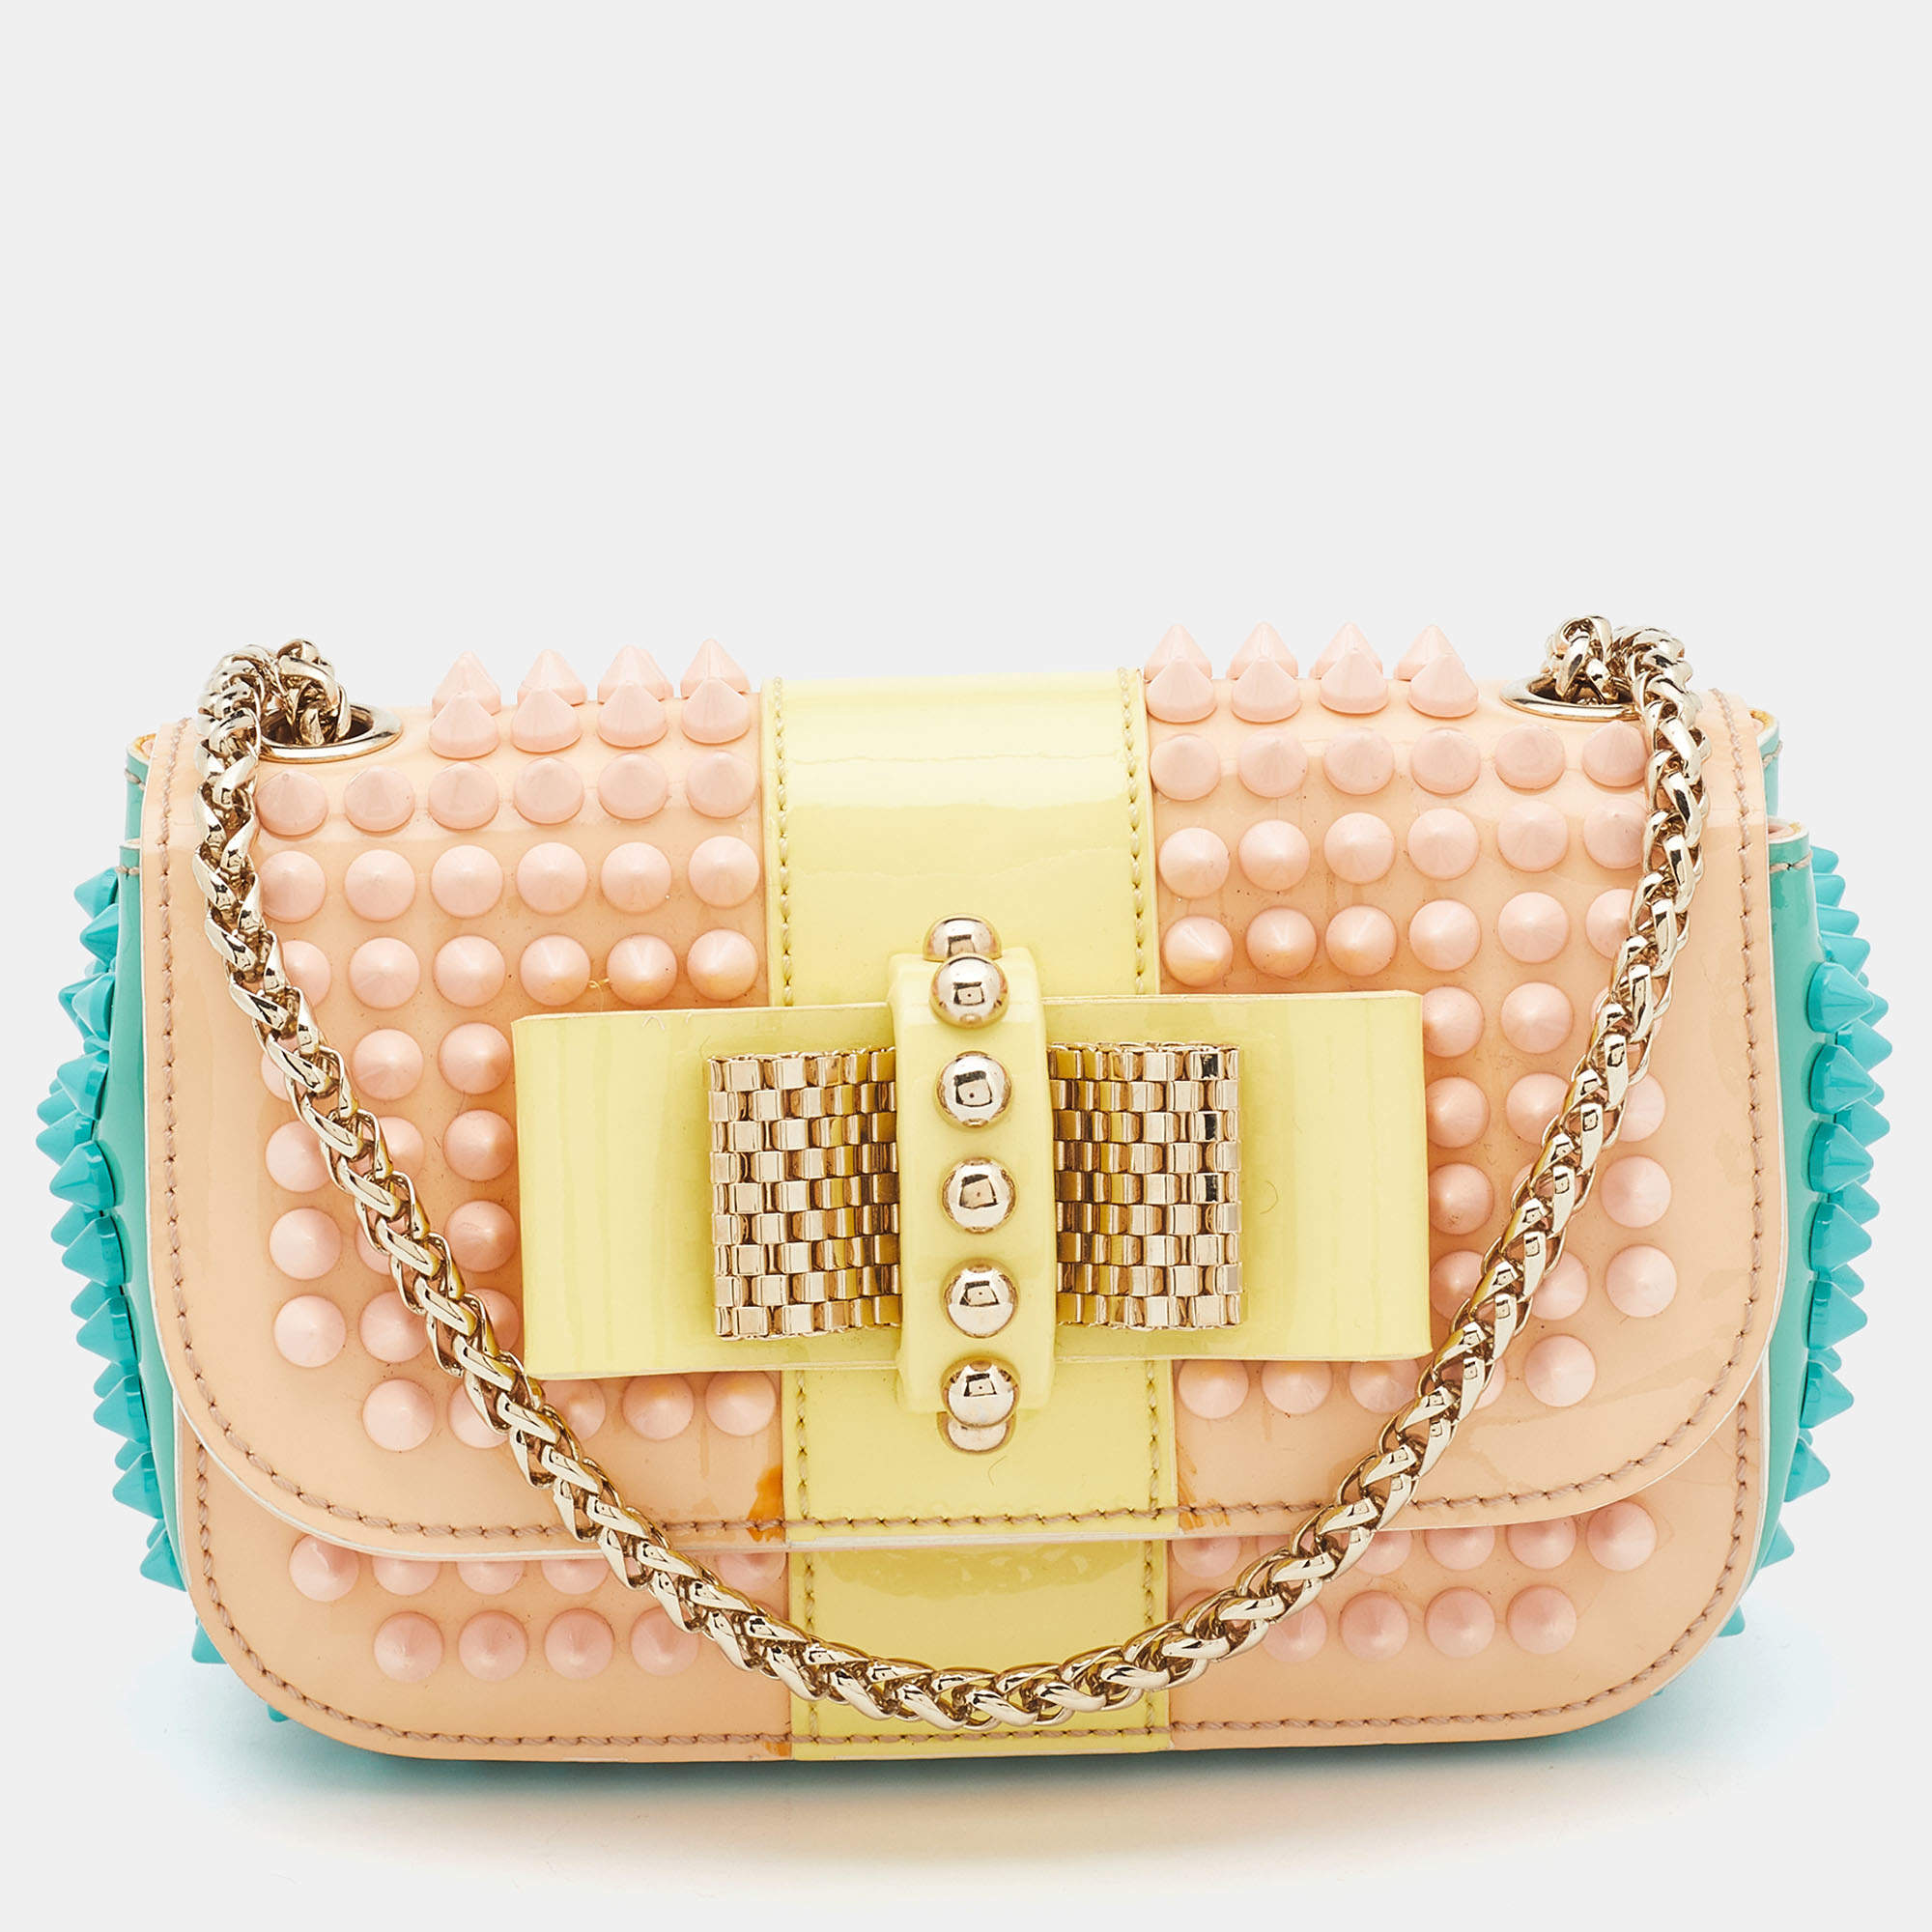 Christian Louboutin Multicolor Patent Leather Mini Spiked Sweet Charity  Crossbody Bag Christian Louboutin